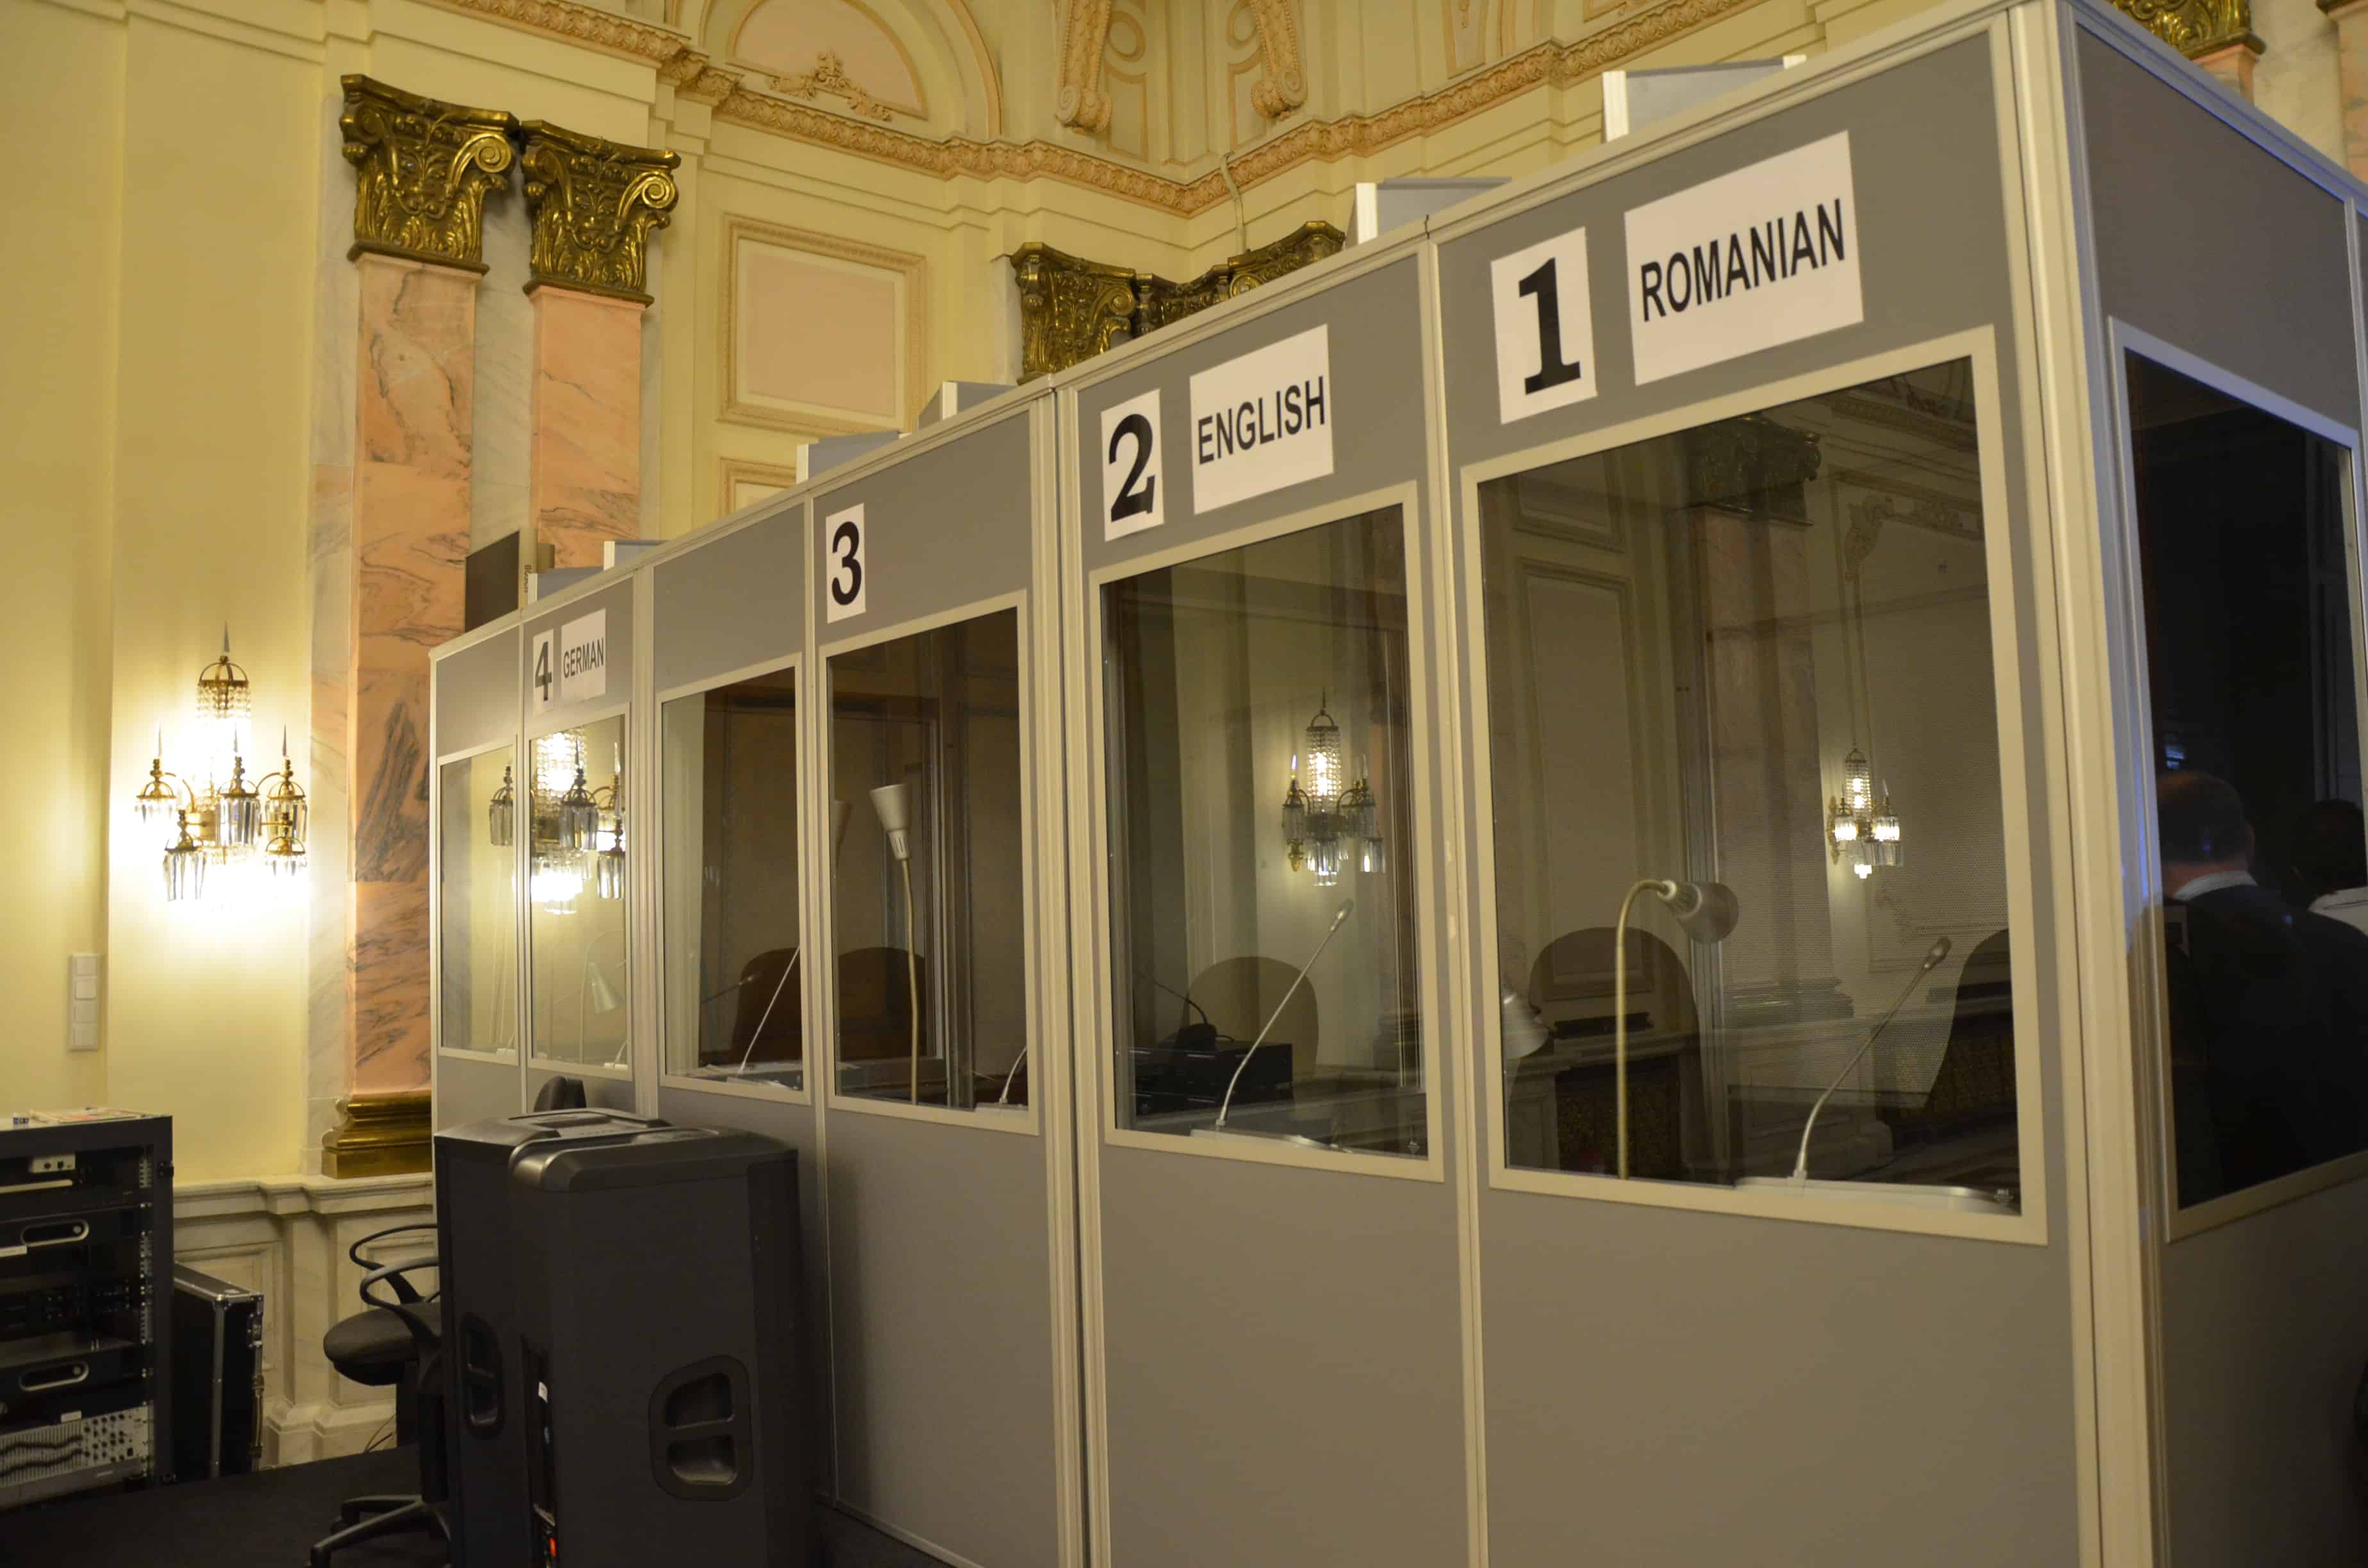 Translation booths in Bălcescu Hall at Palace of Parliament in Bucharest, Romania